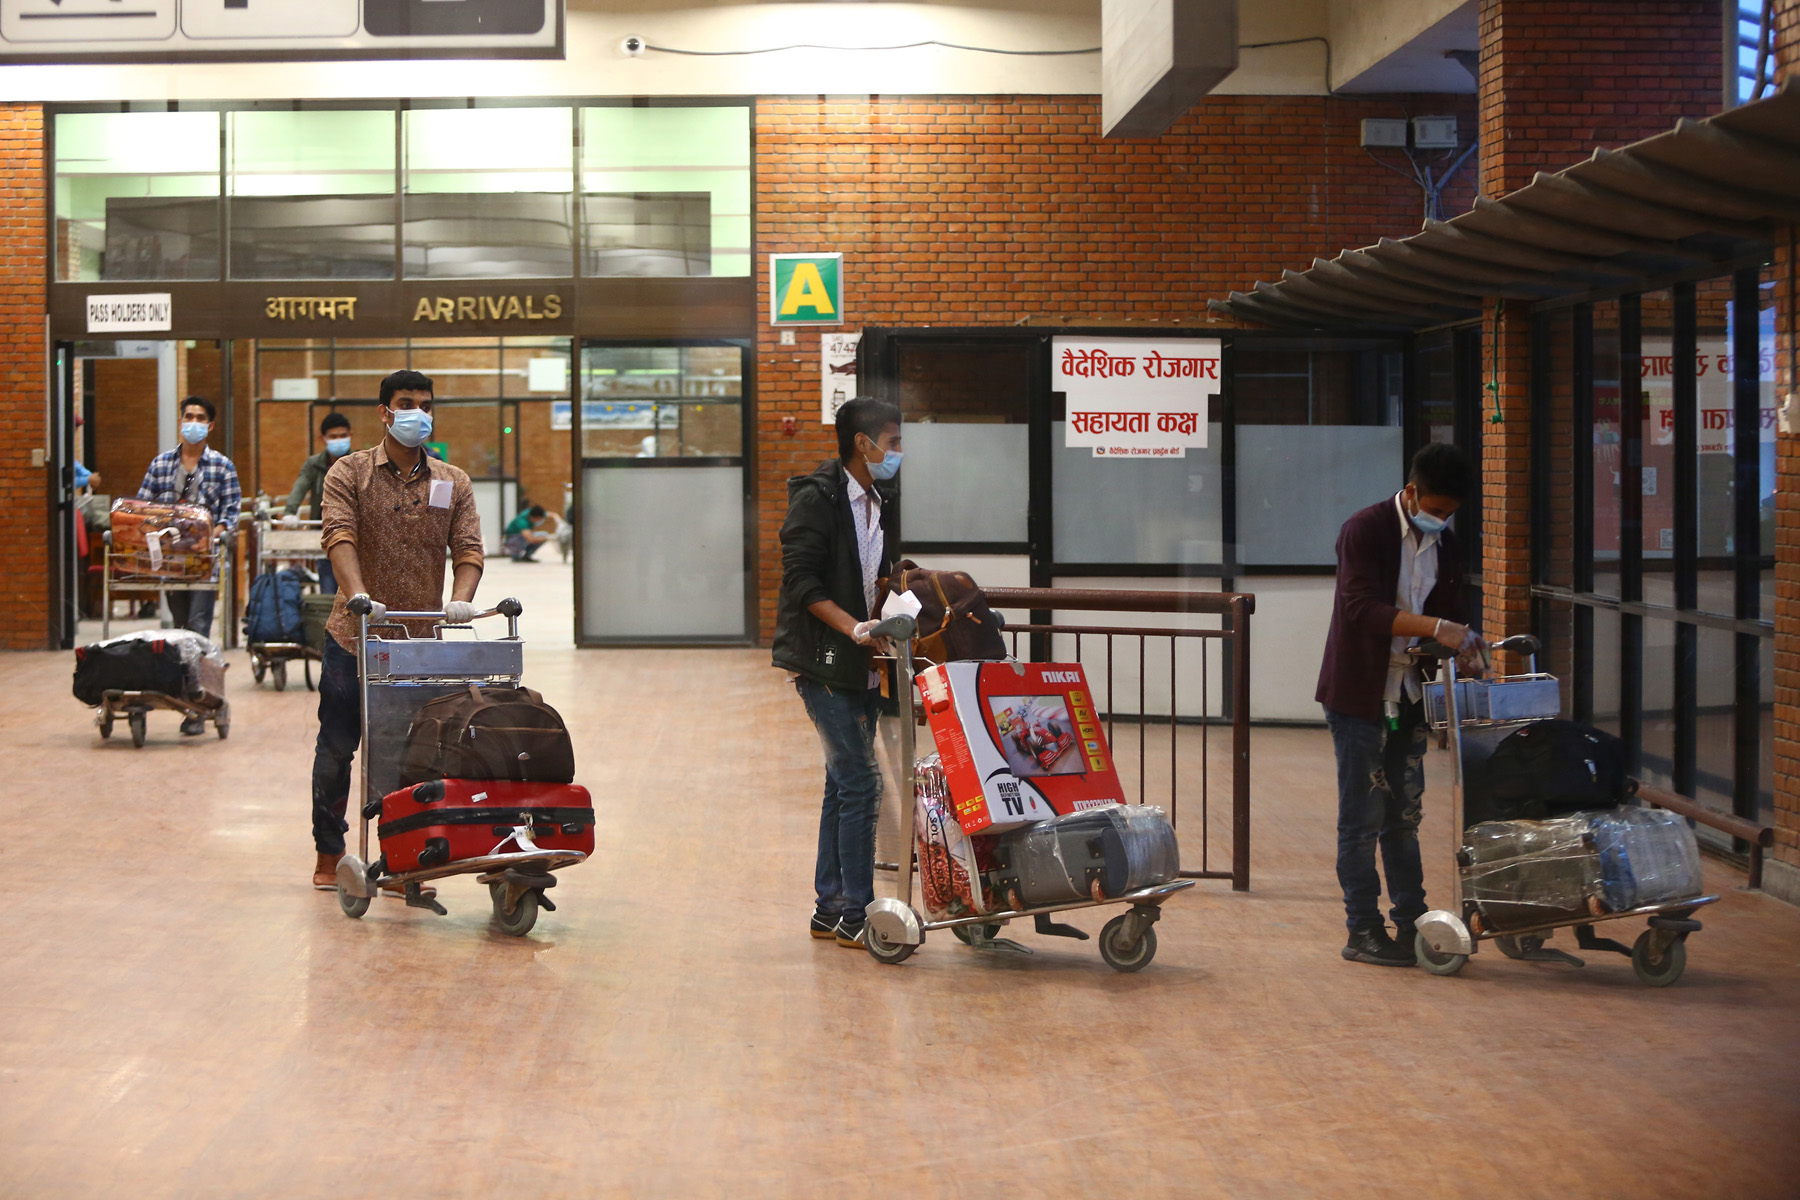 Over 60,000 Nepalis from 58 countries repatriated so far